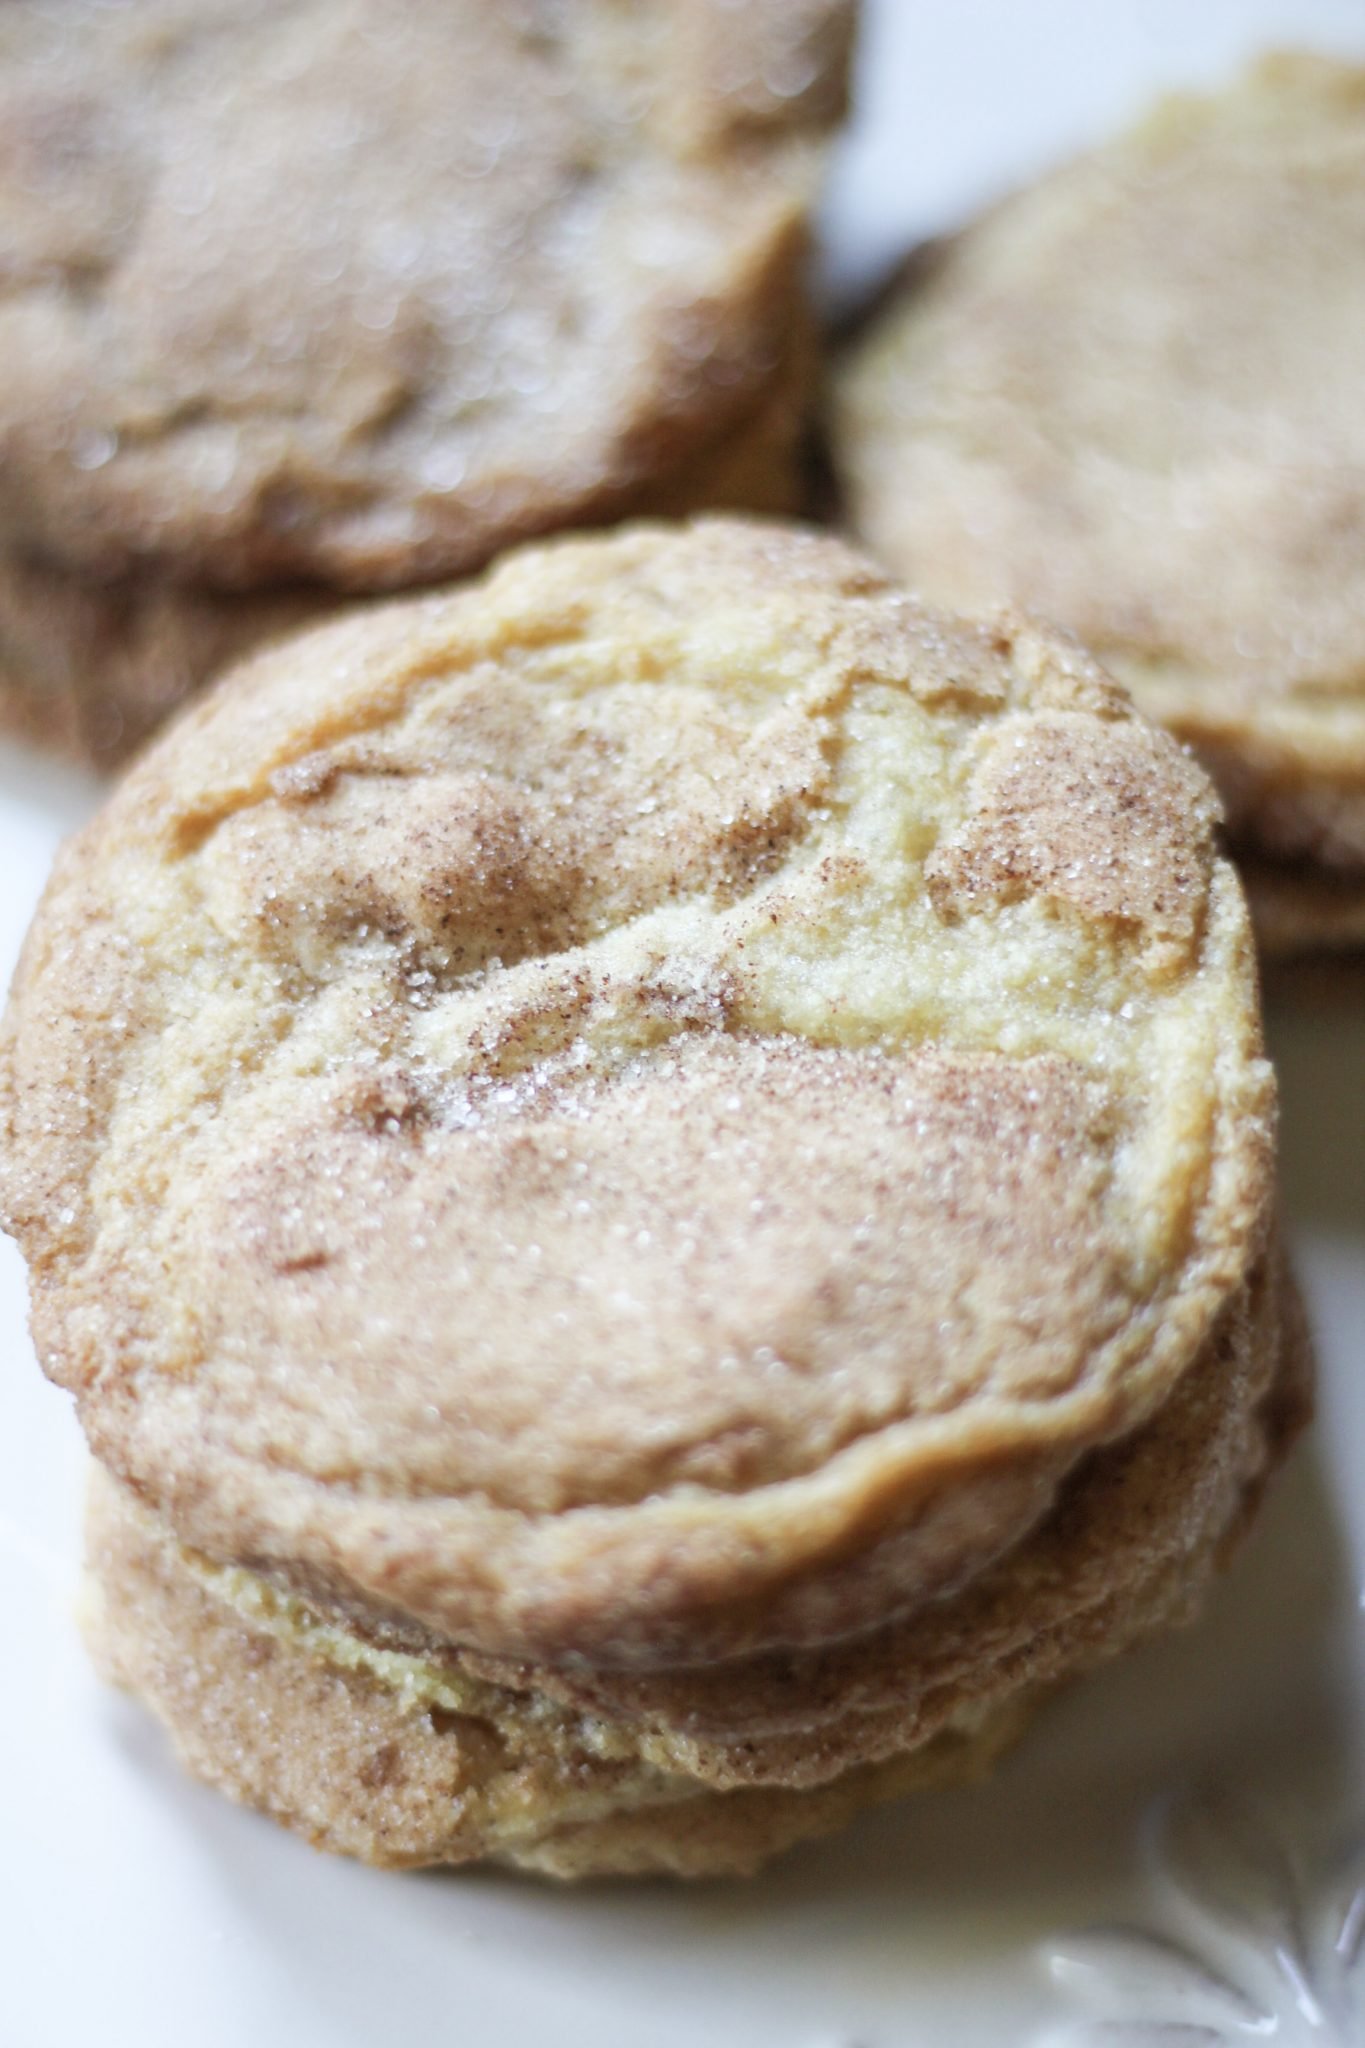  Snickerdoodle Cookies coated with sugar and cinnamon